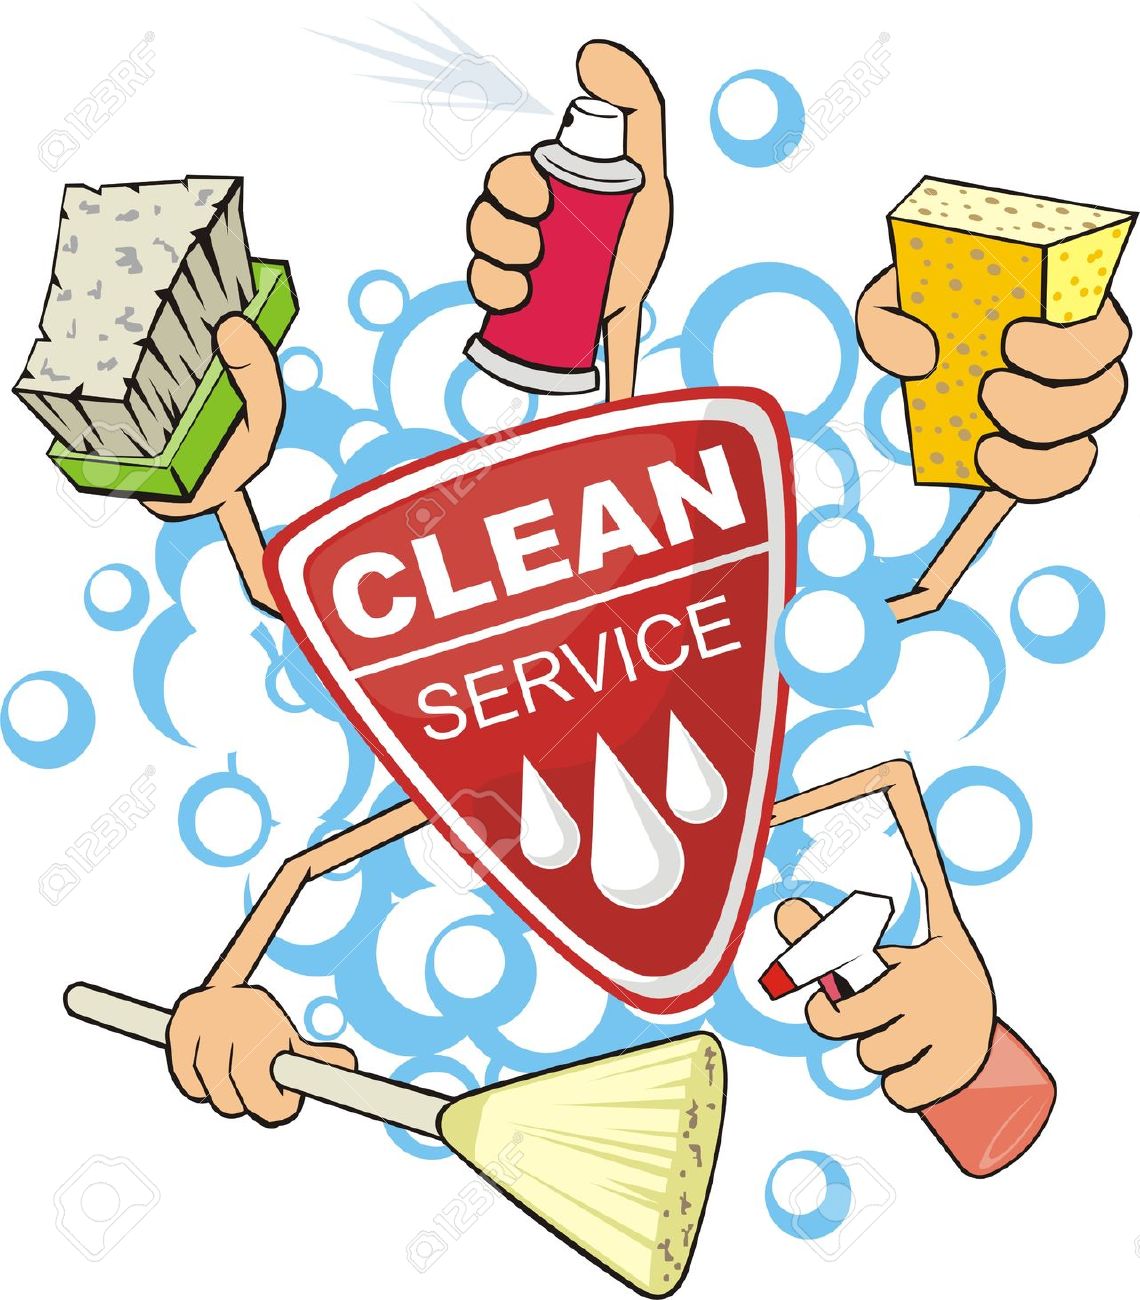 Mother cleaning clipart free 